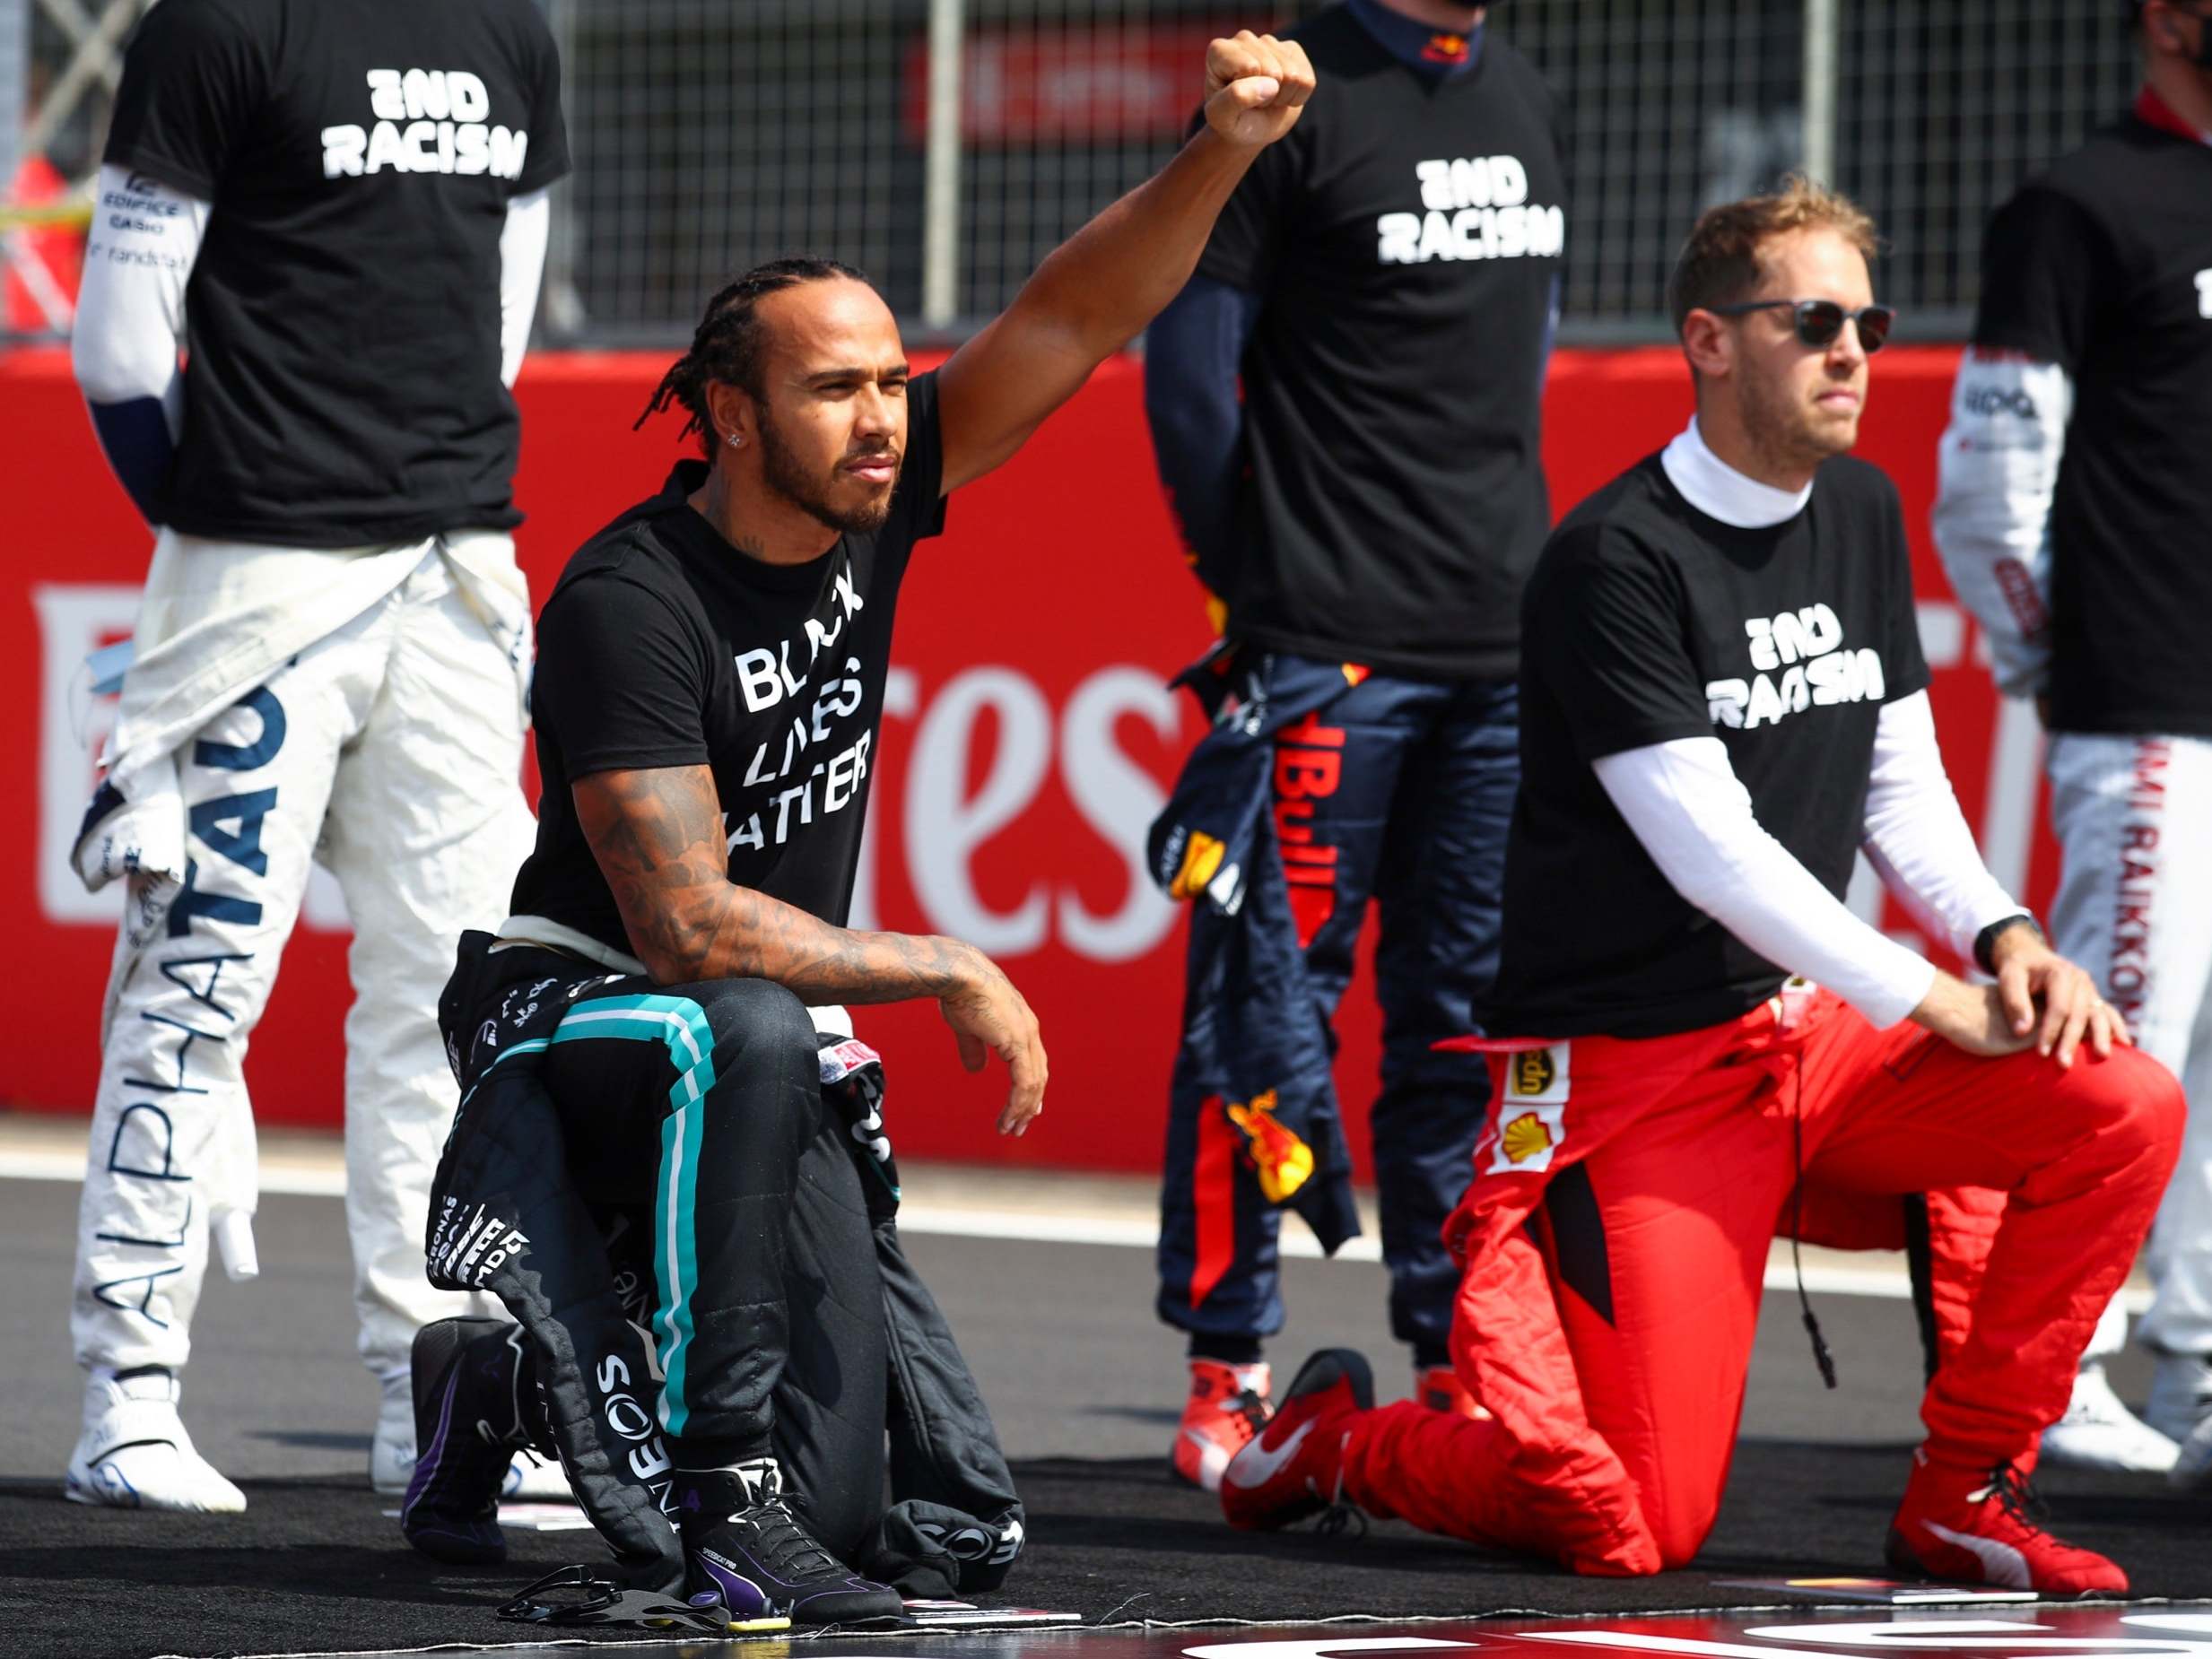 Lewis Hamilton underwent diversity training in an effort to increase his understanding of racial equality